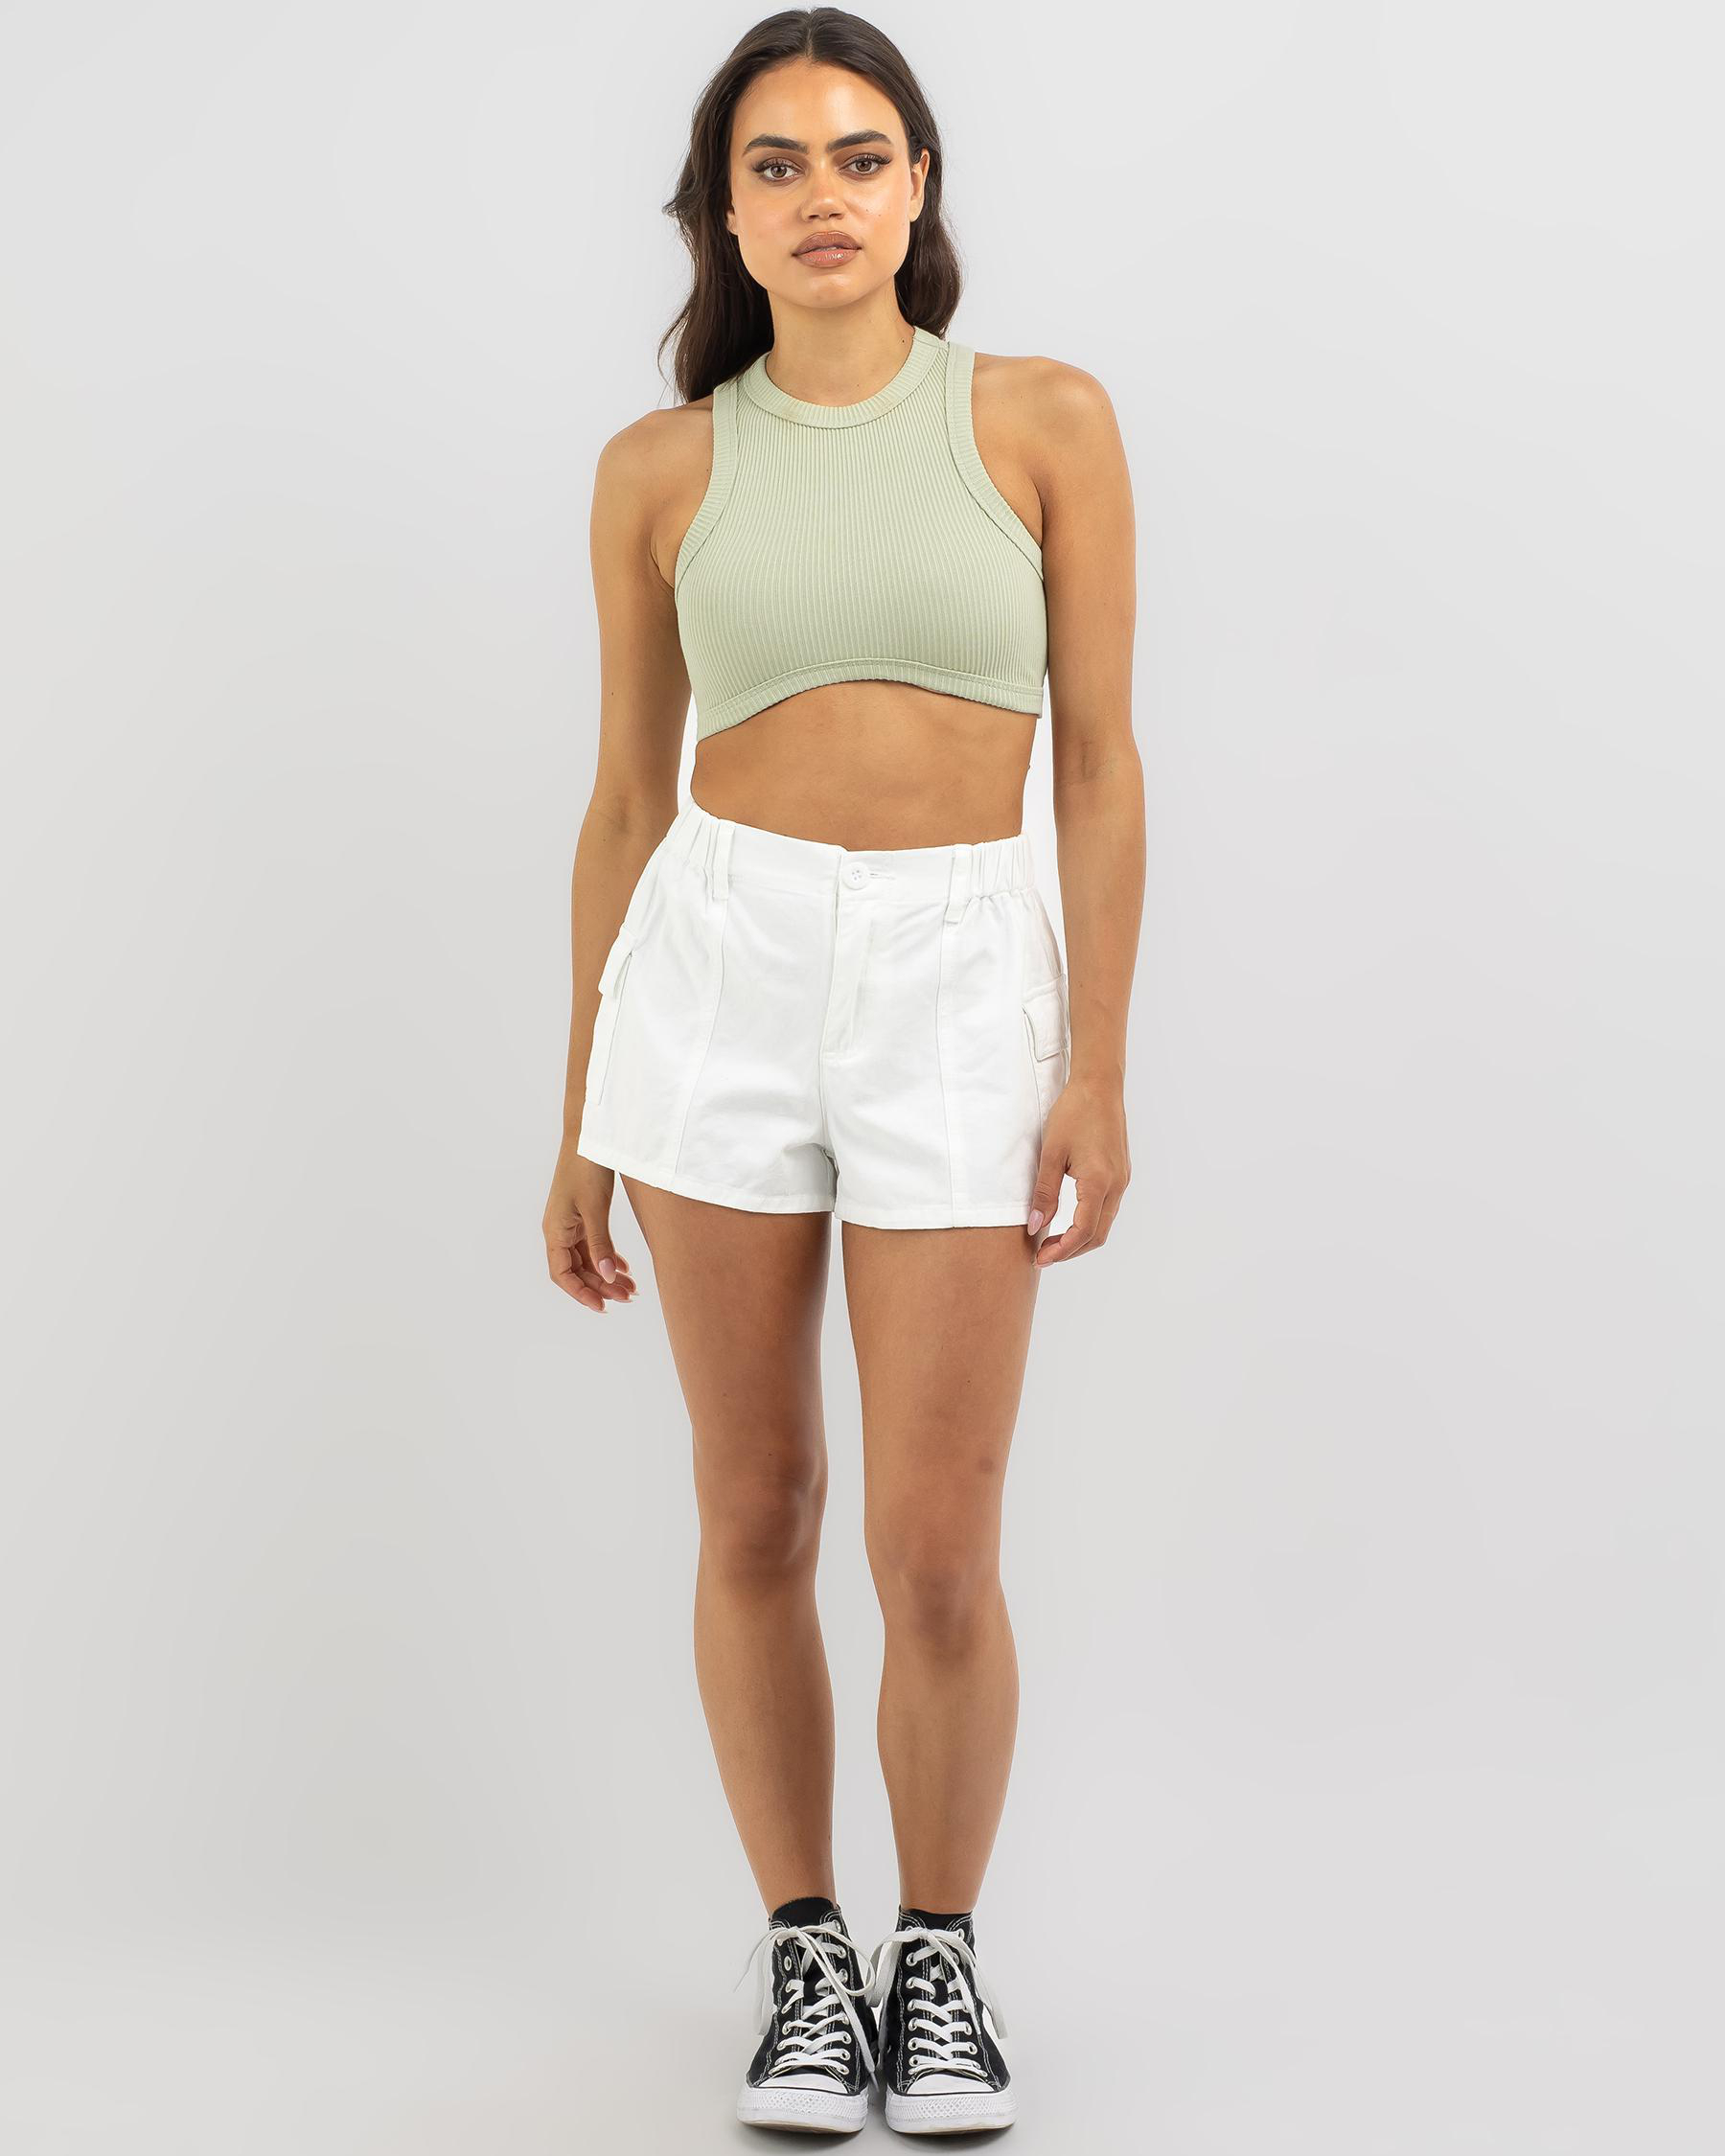 Ava And Ever Kendra Ultra Crop Top In Sage - Fast Shipping & Easy ...